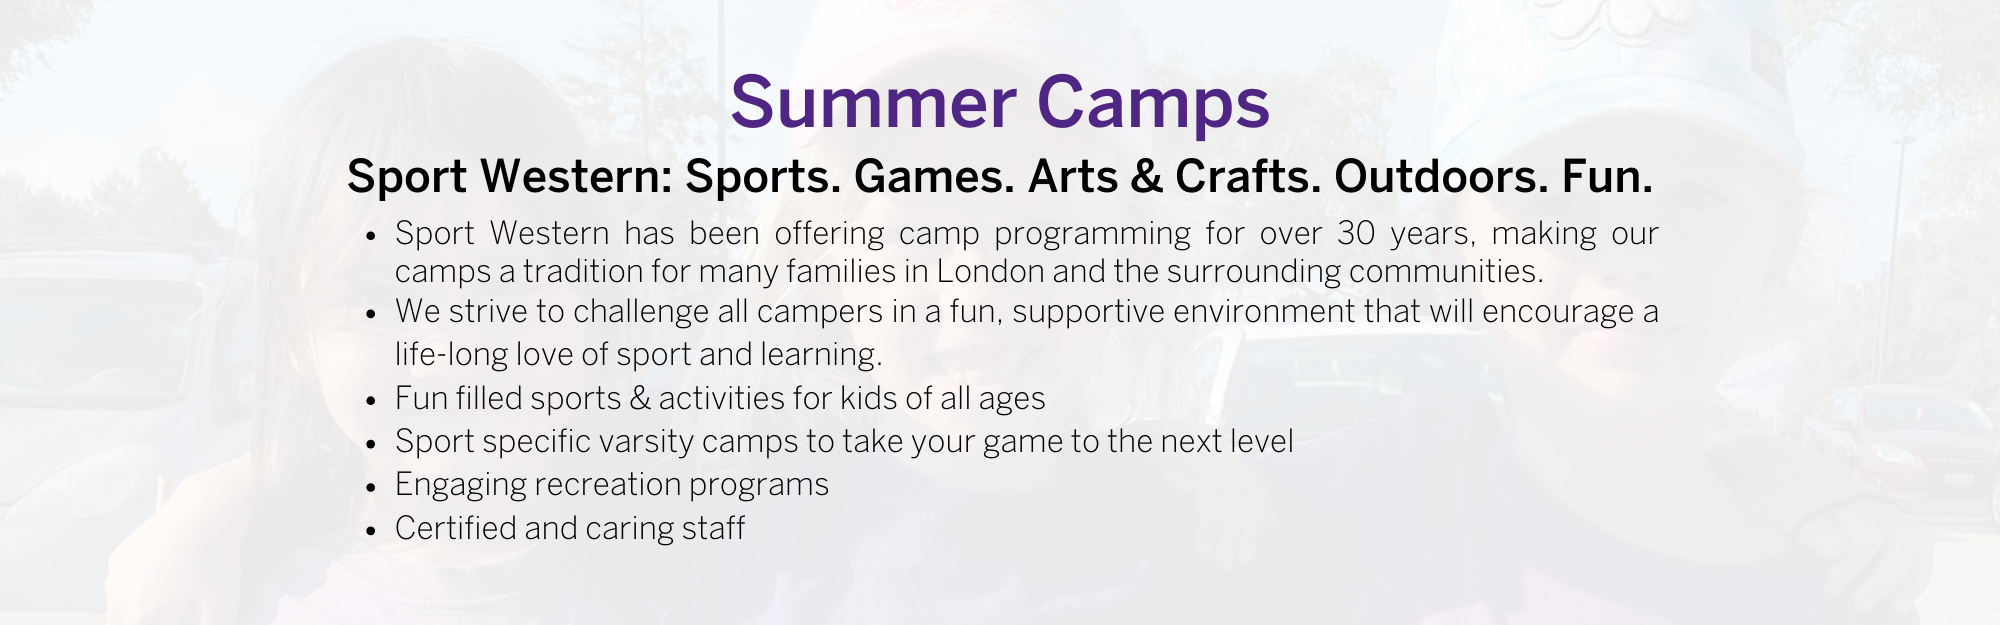 Summer Camps: fun filled activities for kids of all ages sport specific varsity camps to take your game to the next level engaging recreation programs certified and caring staff